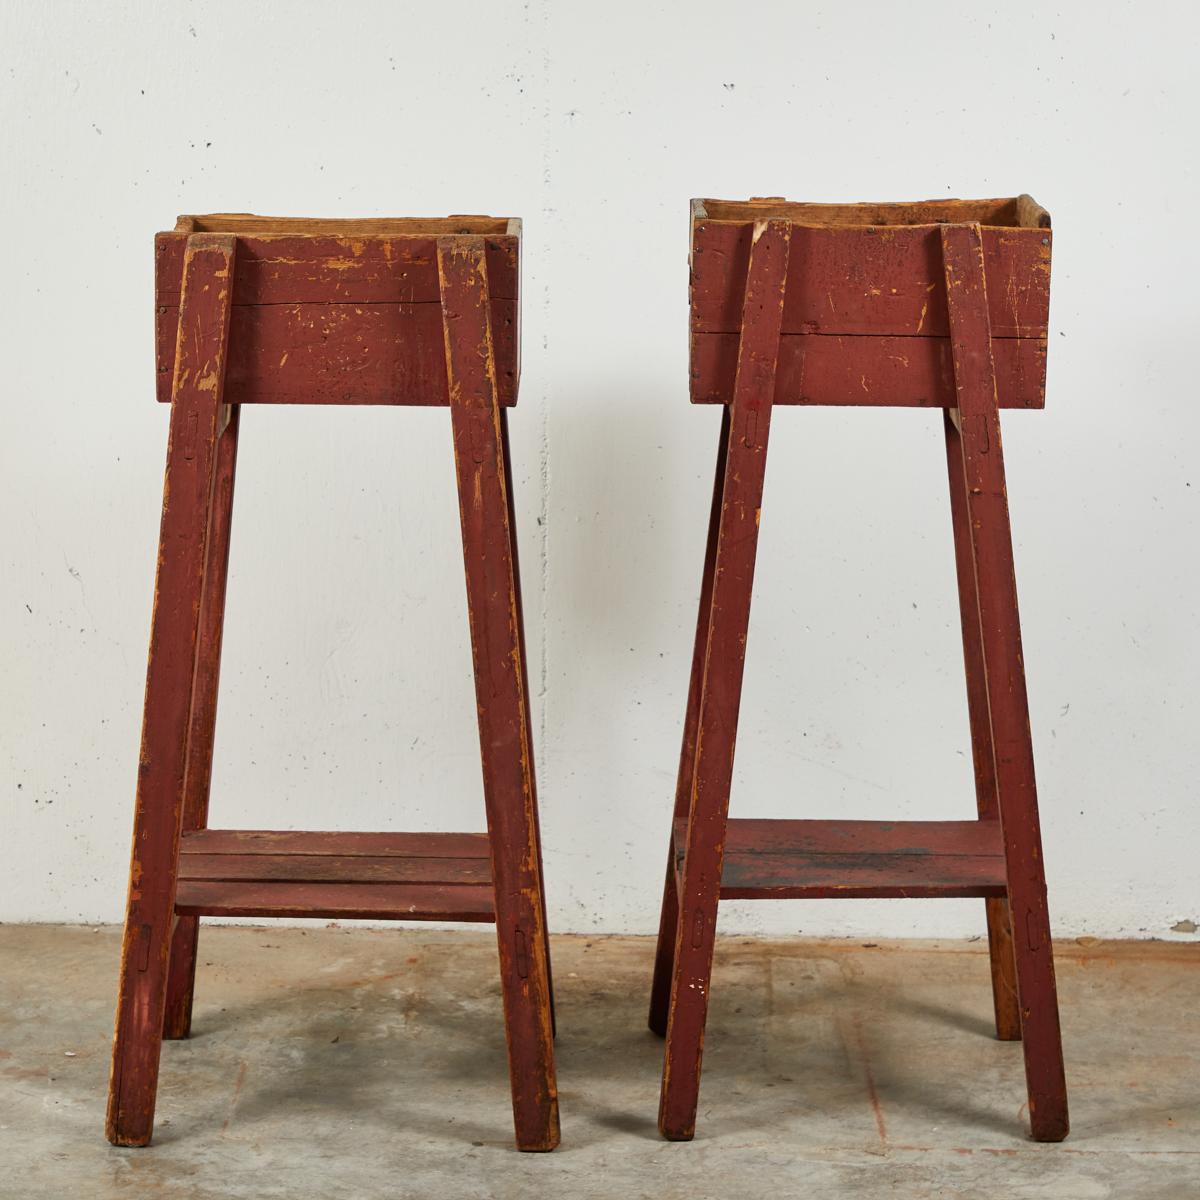 20th Century Pair of French Country Red Painted Wooden Planters on Long Splayed Legs